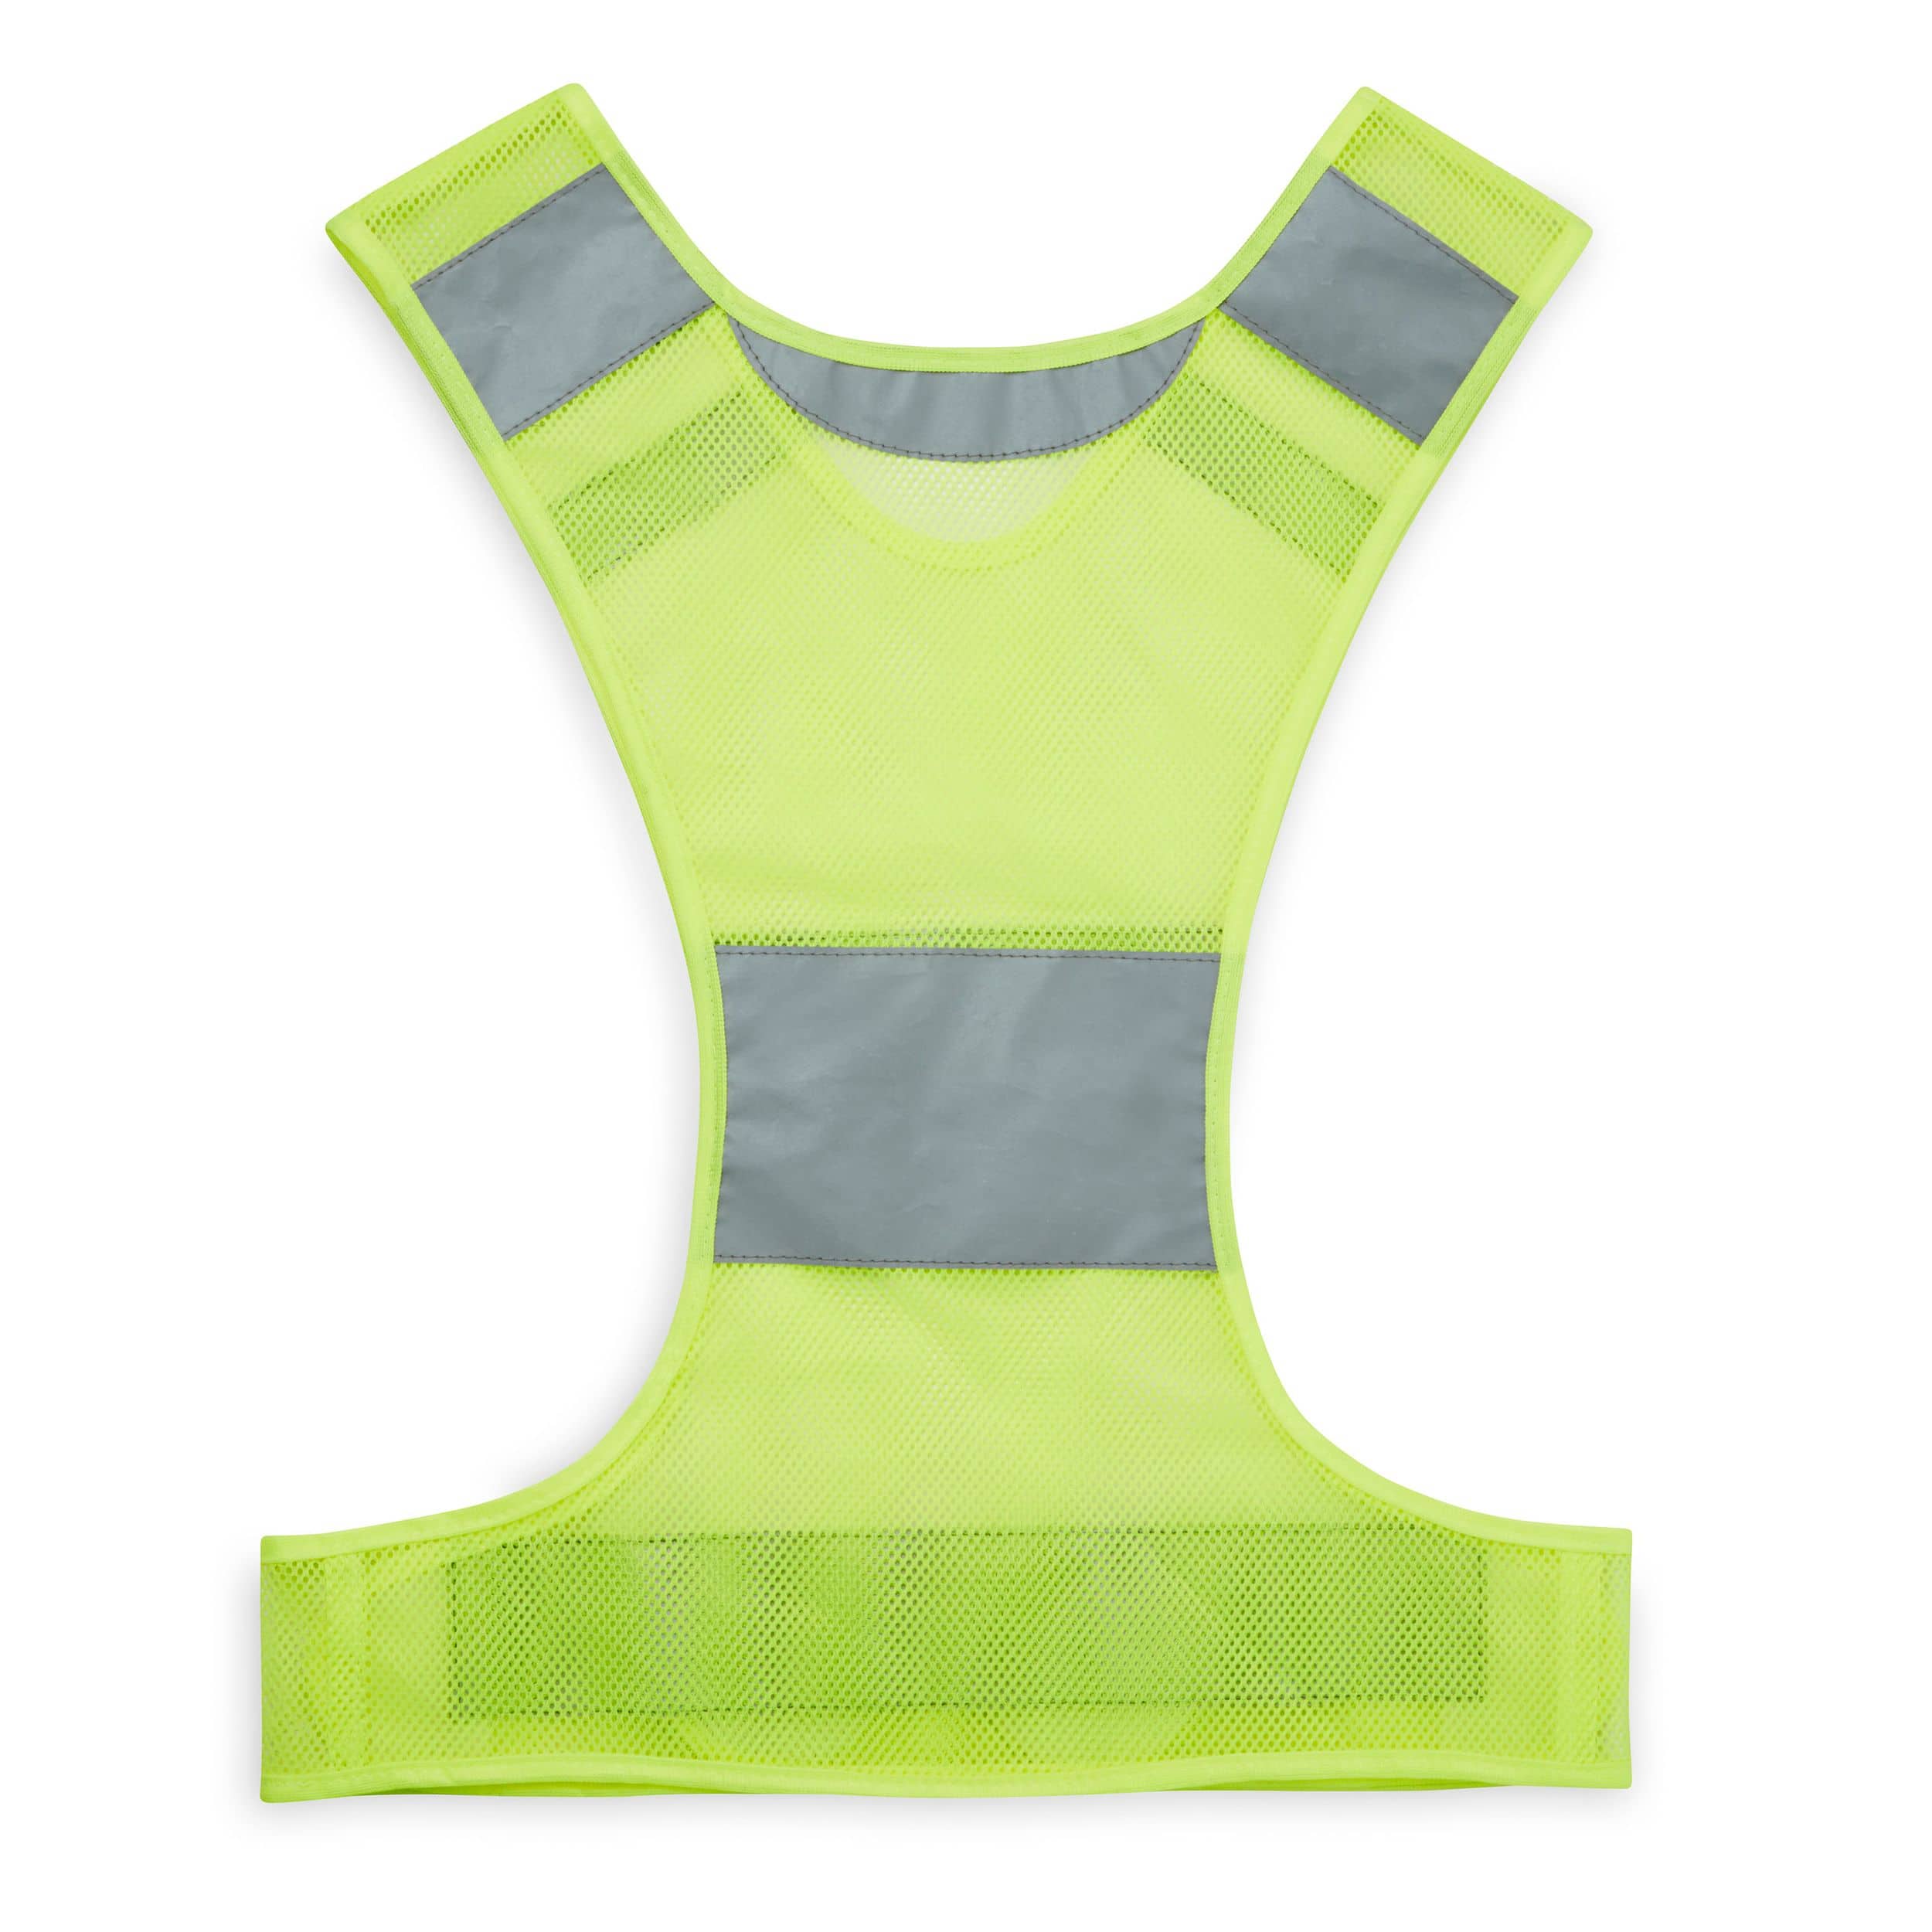 Gaiam Reflective Safety Running Gear Vest, One Size | Canadian Tire